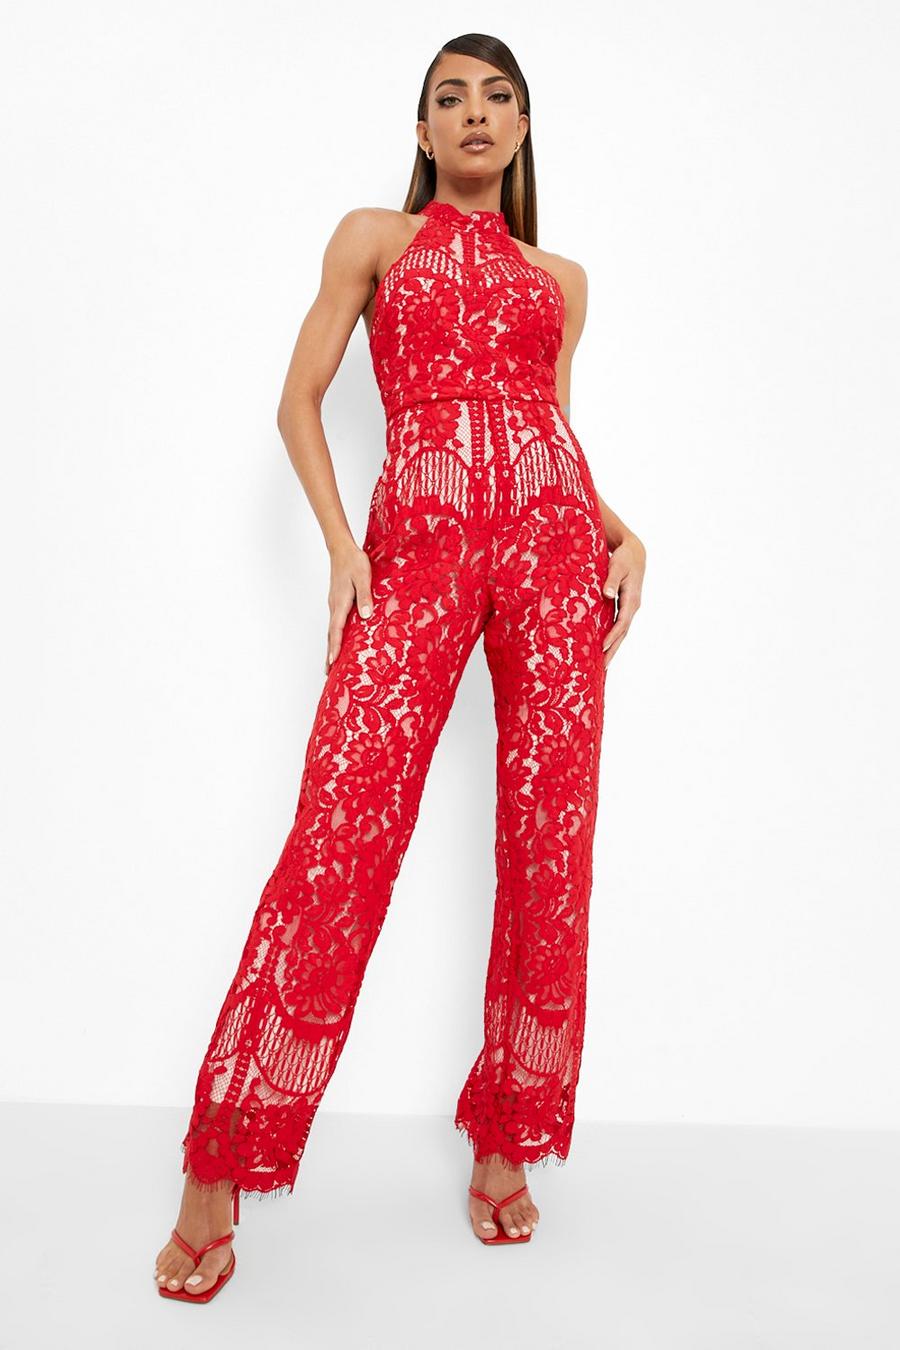 Lace Halter Neck Sleeveless Jumpsuit, Red rojo